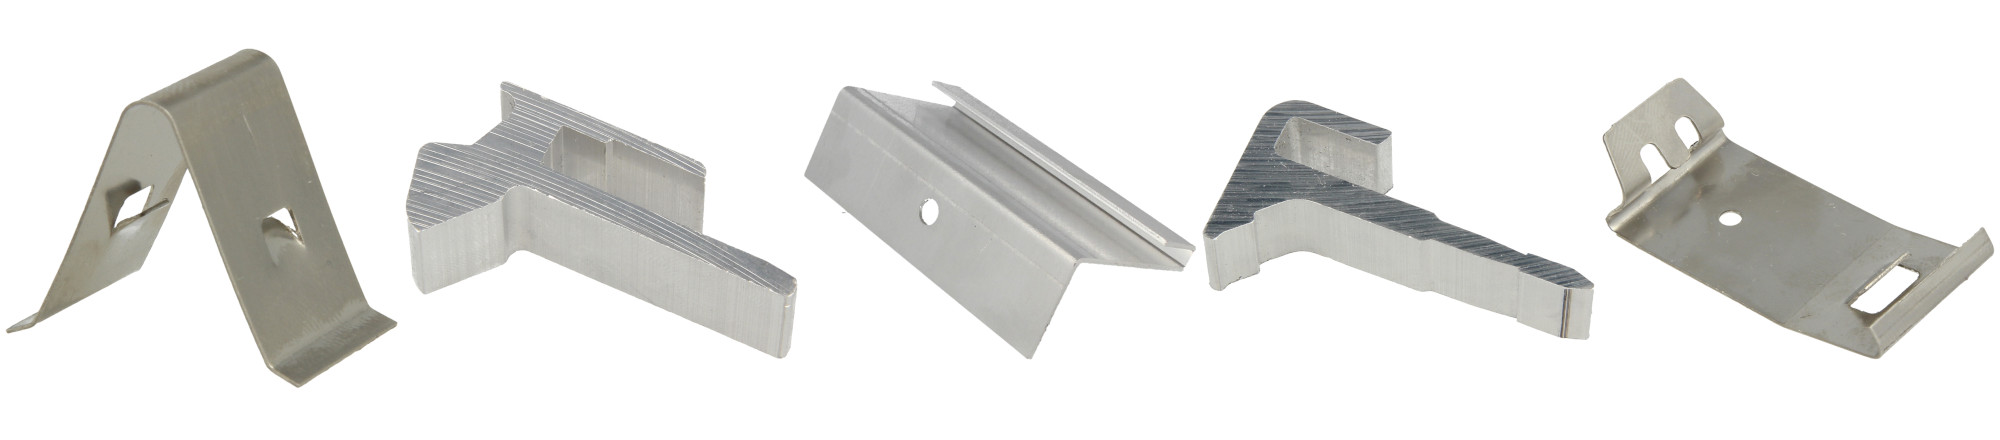 Various roof and gutter parts